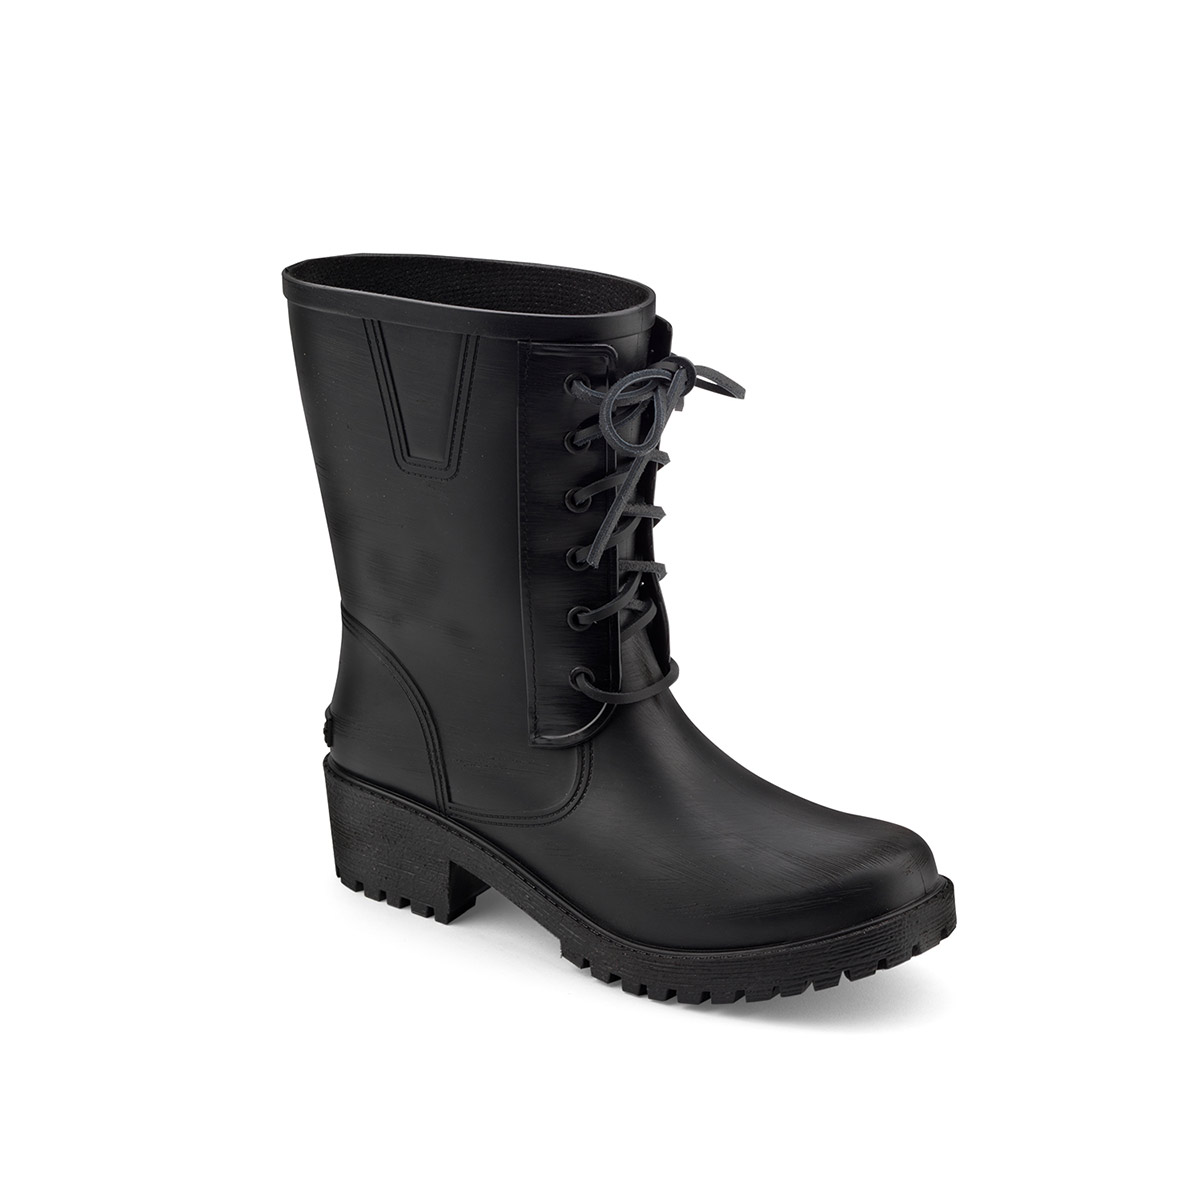 Pvc boot with laces